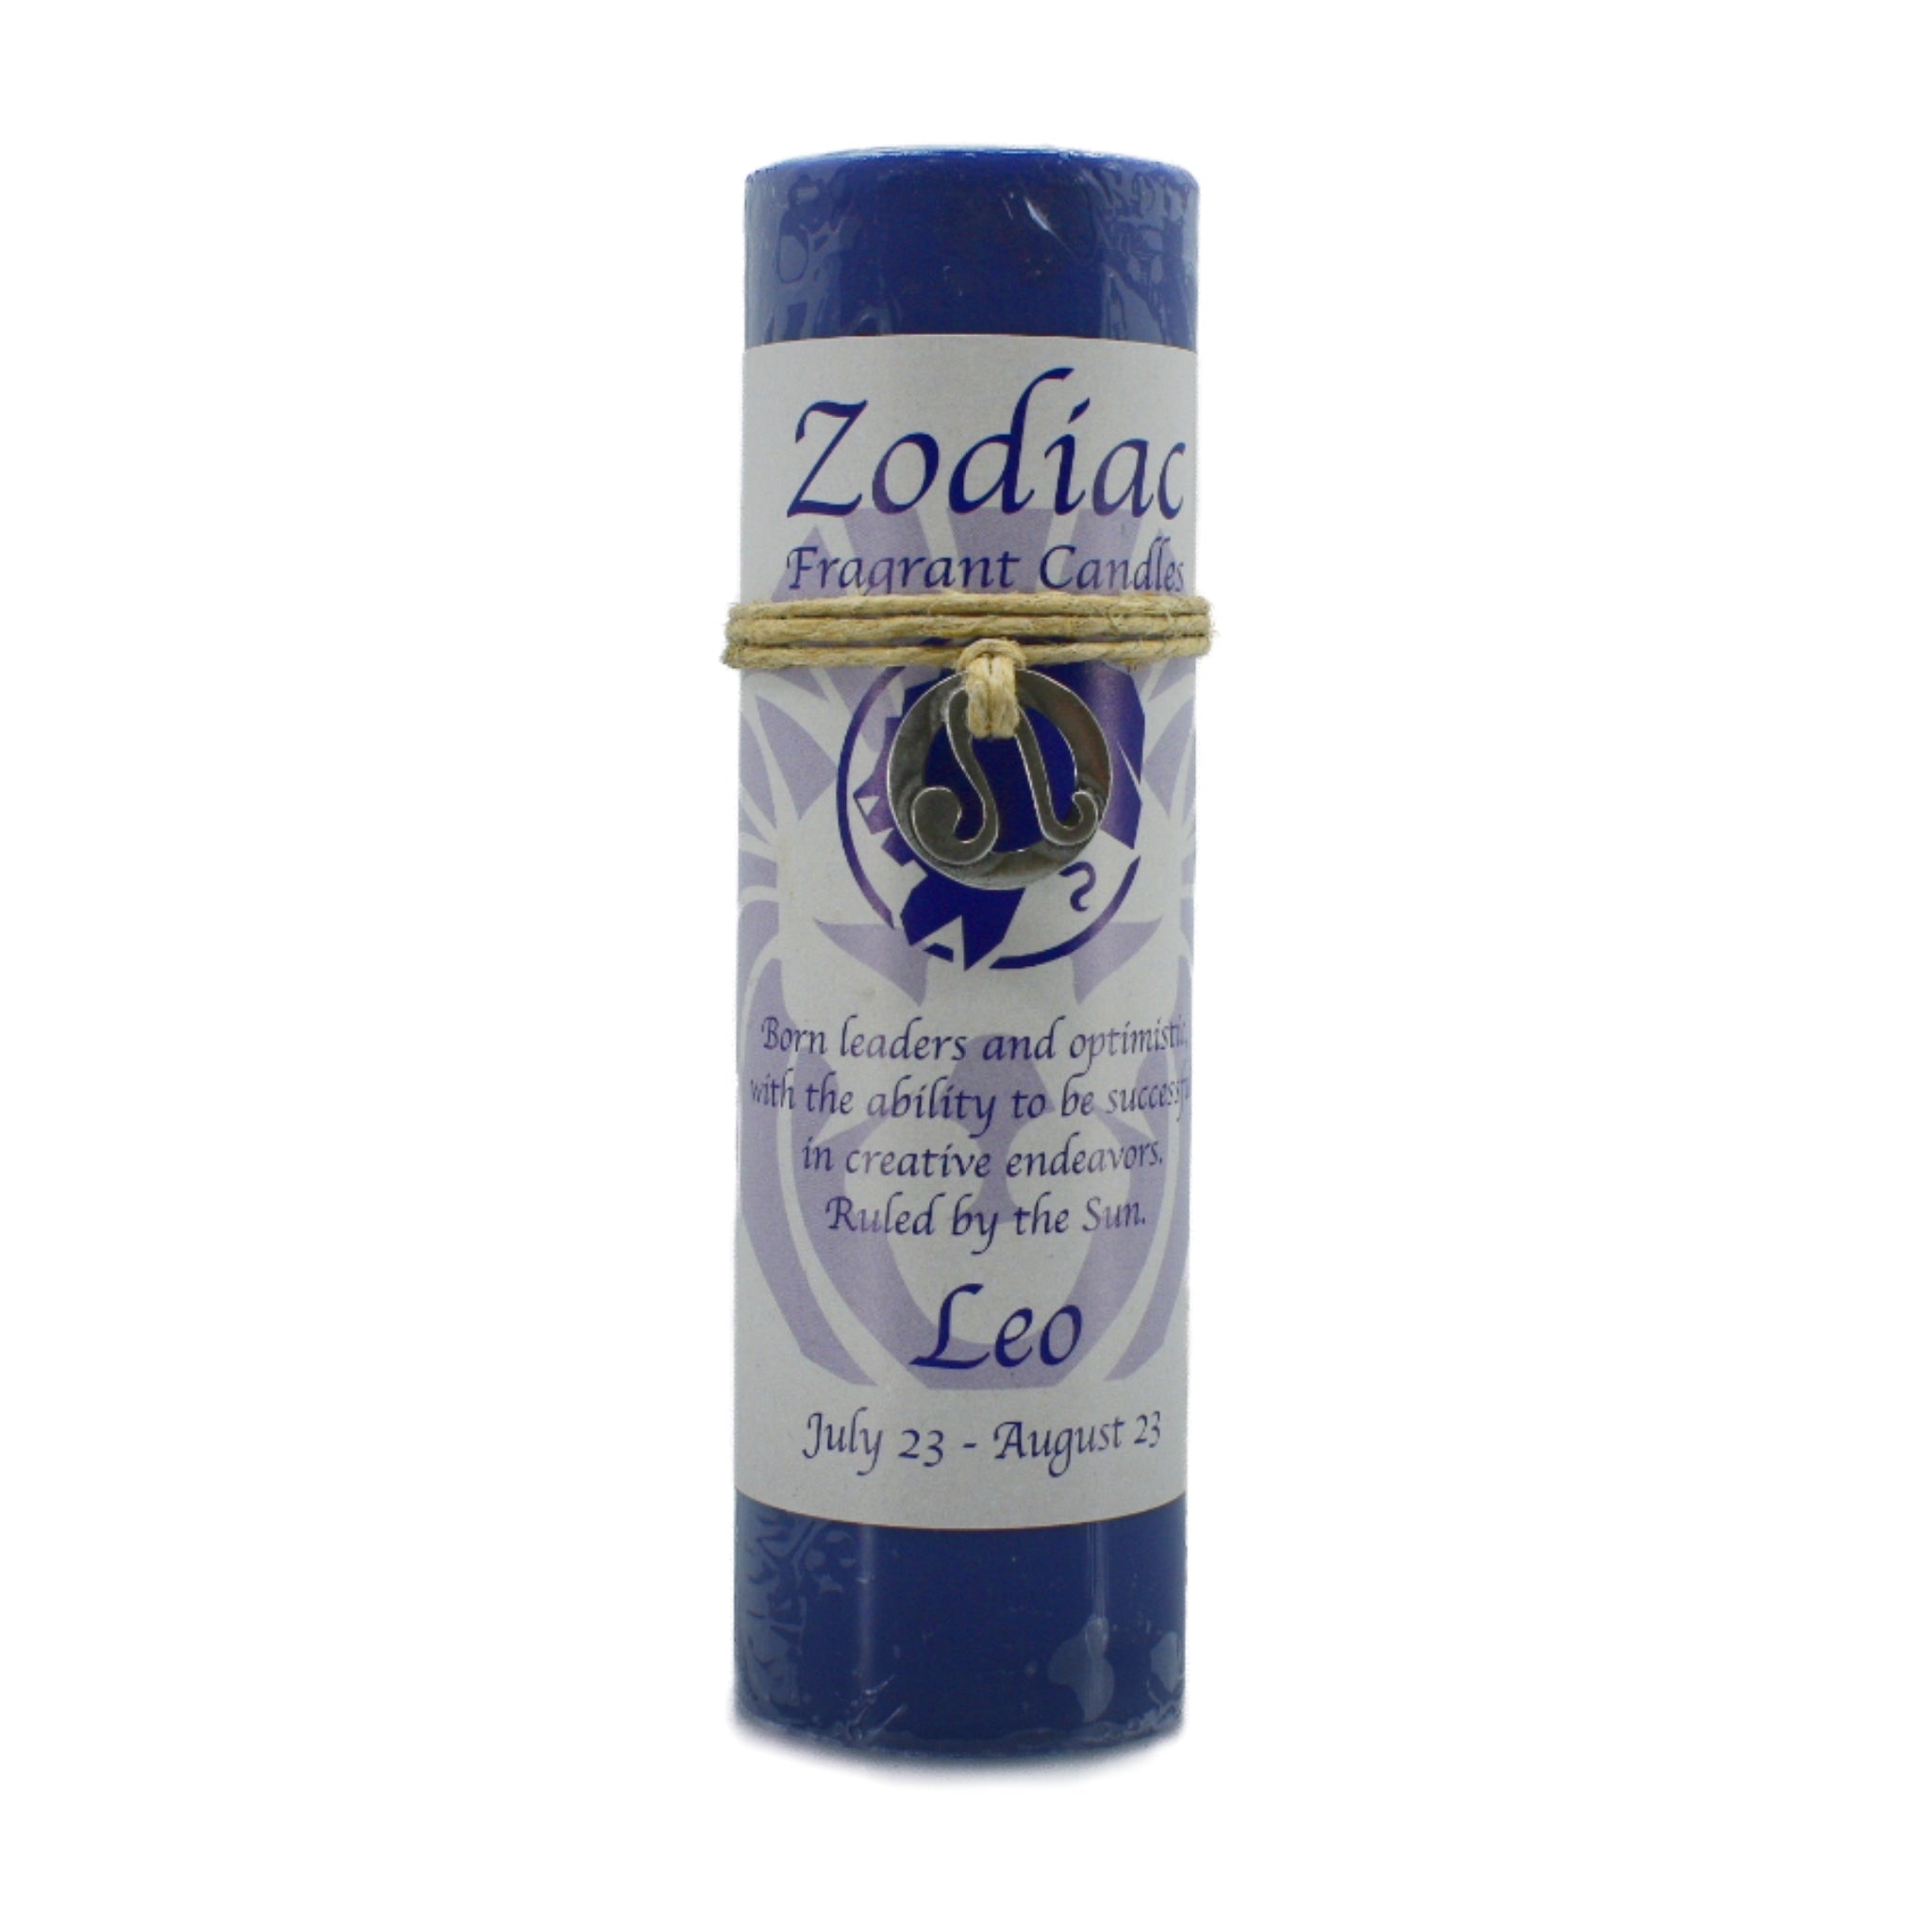 Leo Zodiac Pendant Candle.  Optimistic, born leaders, with the ability to be successful in creative endeavors.  Candle is blue.